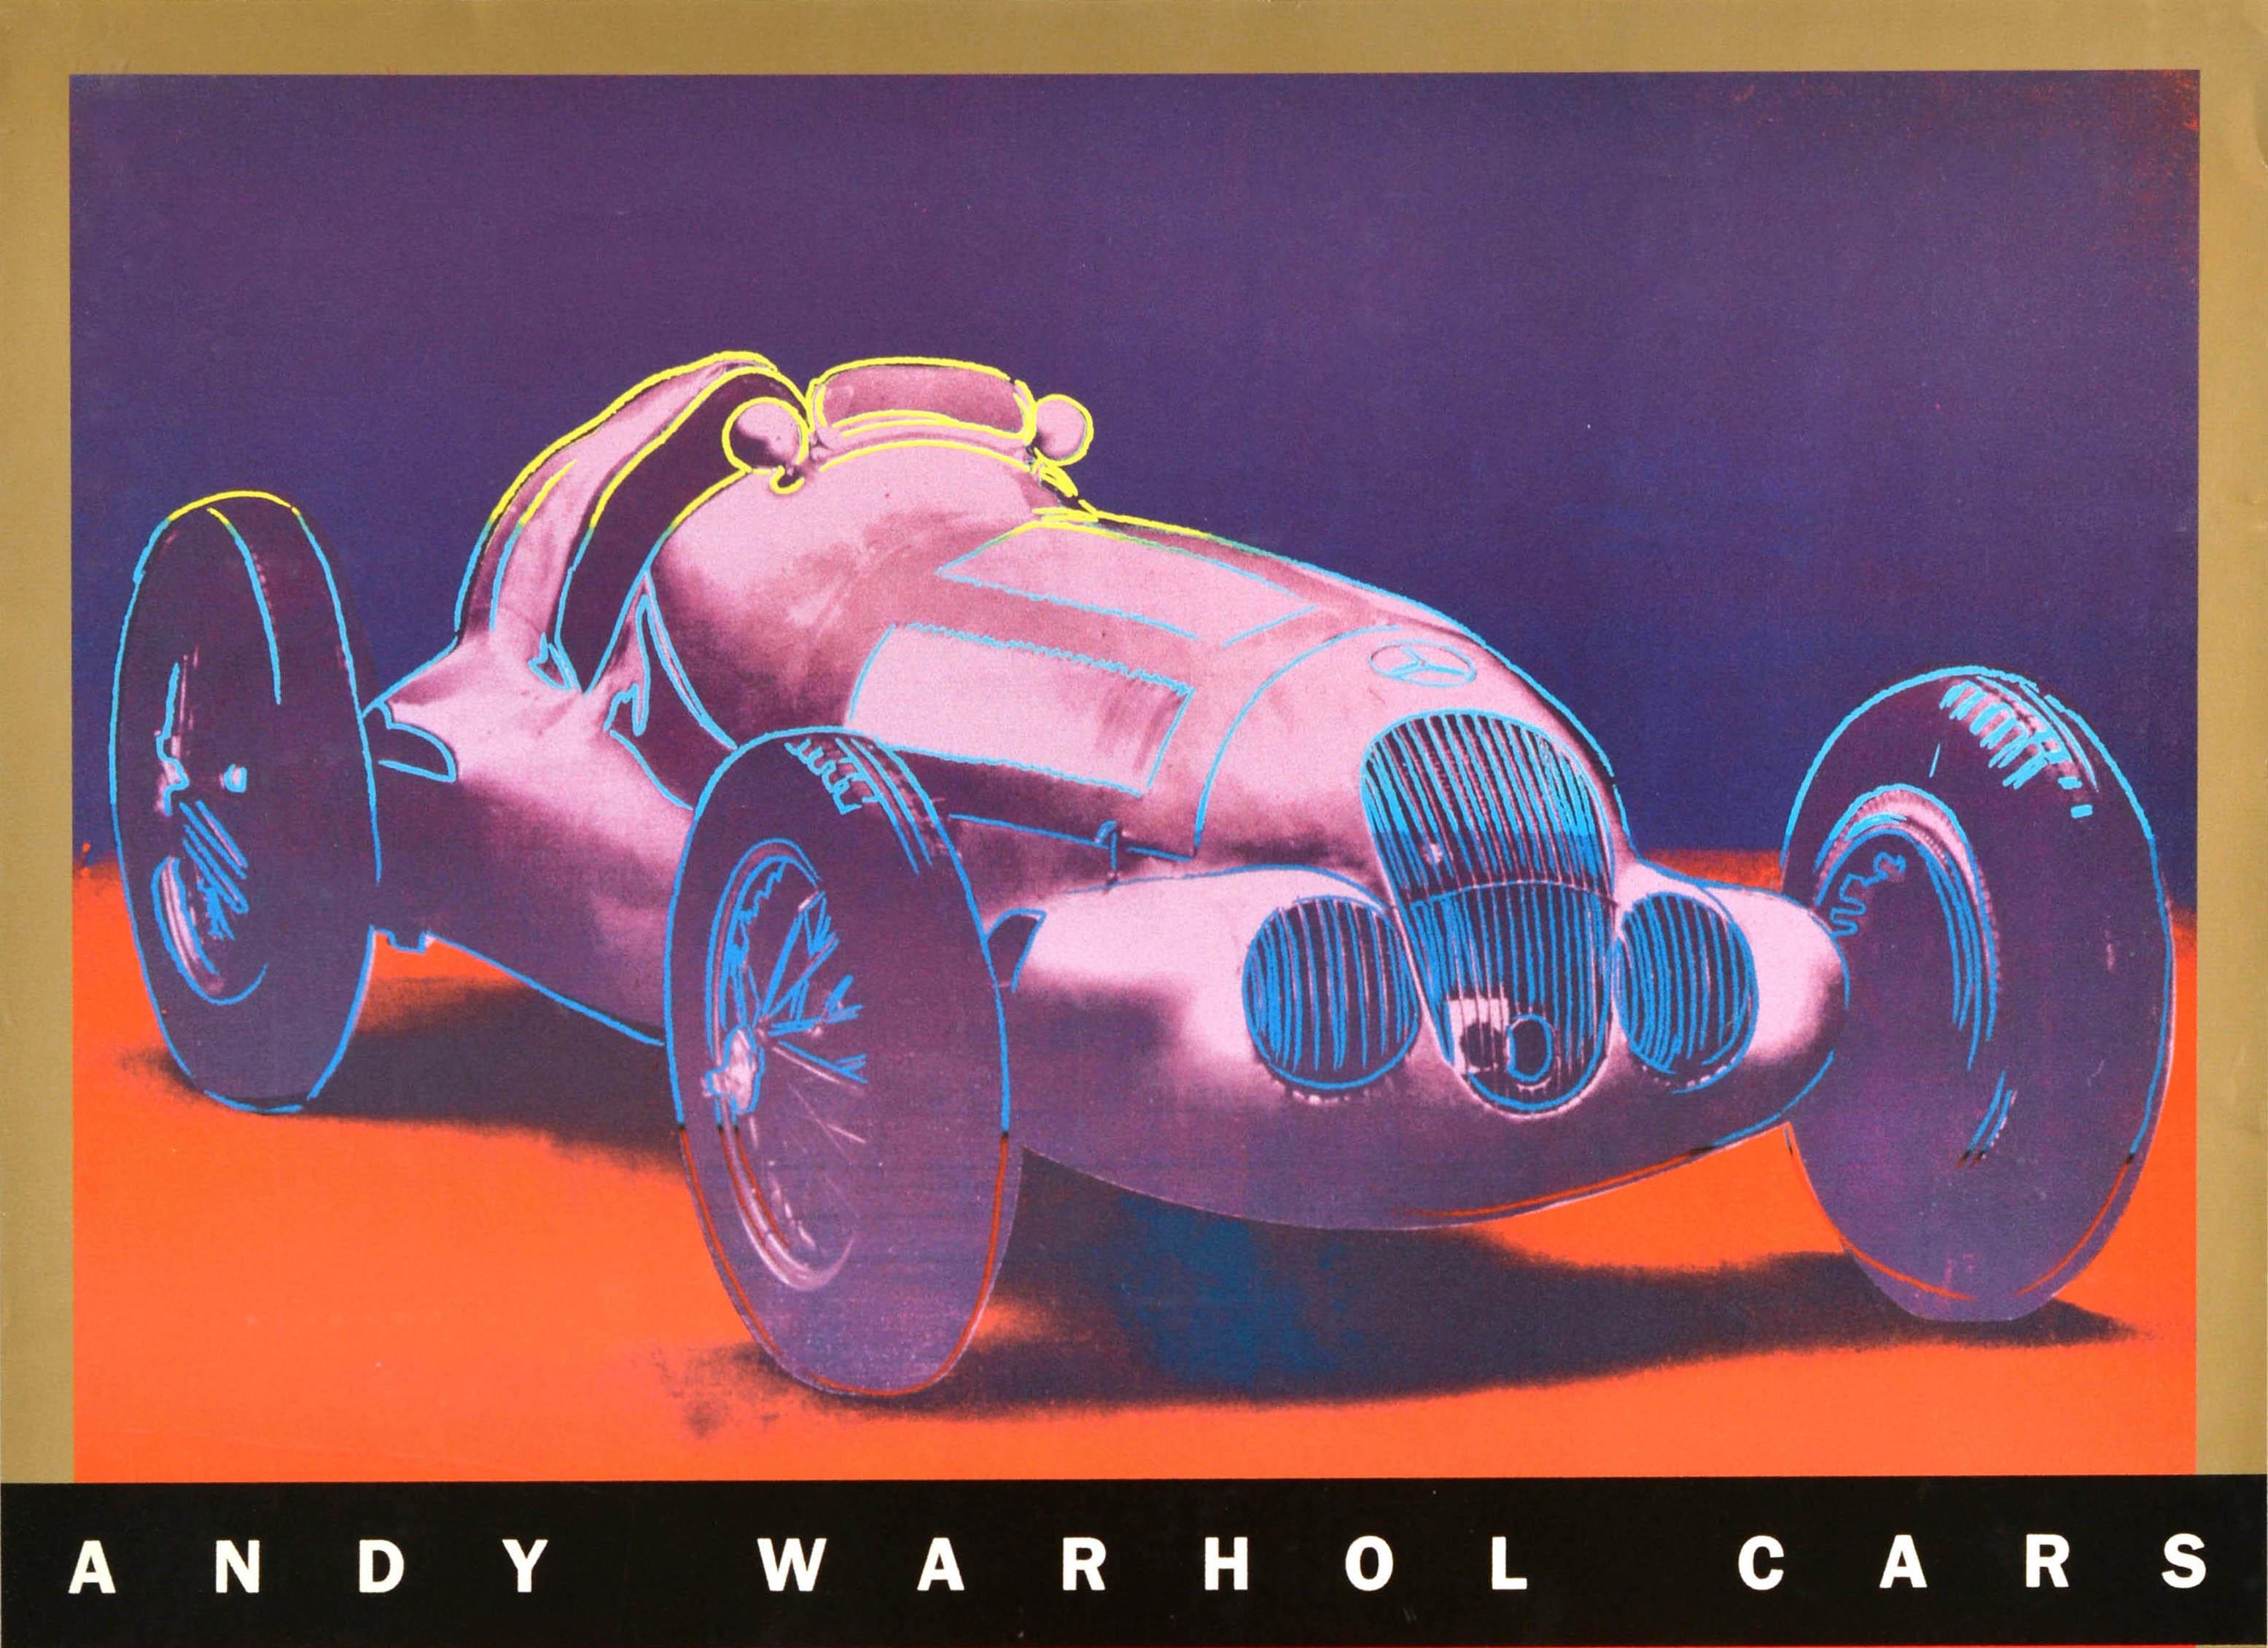 Original vintage advertising poster for the Andy Warhol Cars exhibition at the Solomon R. Guggenheim Museum New York held from 30 September to 27 November 1988 featuring a colourful image of two Mercedes Benz racing cars on purple, red and yellow